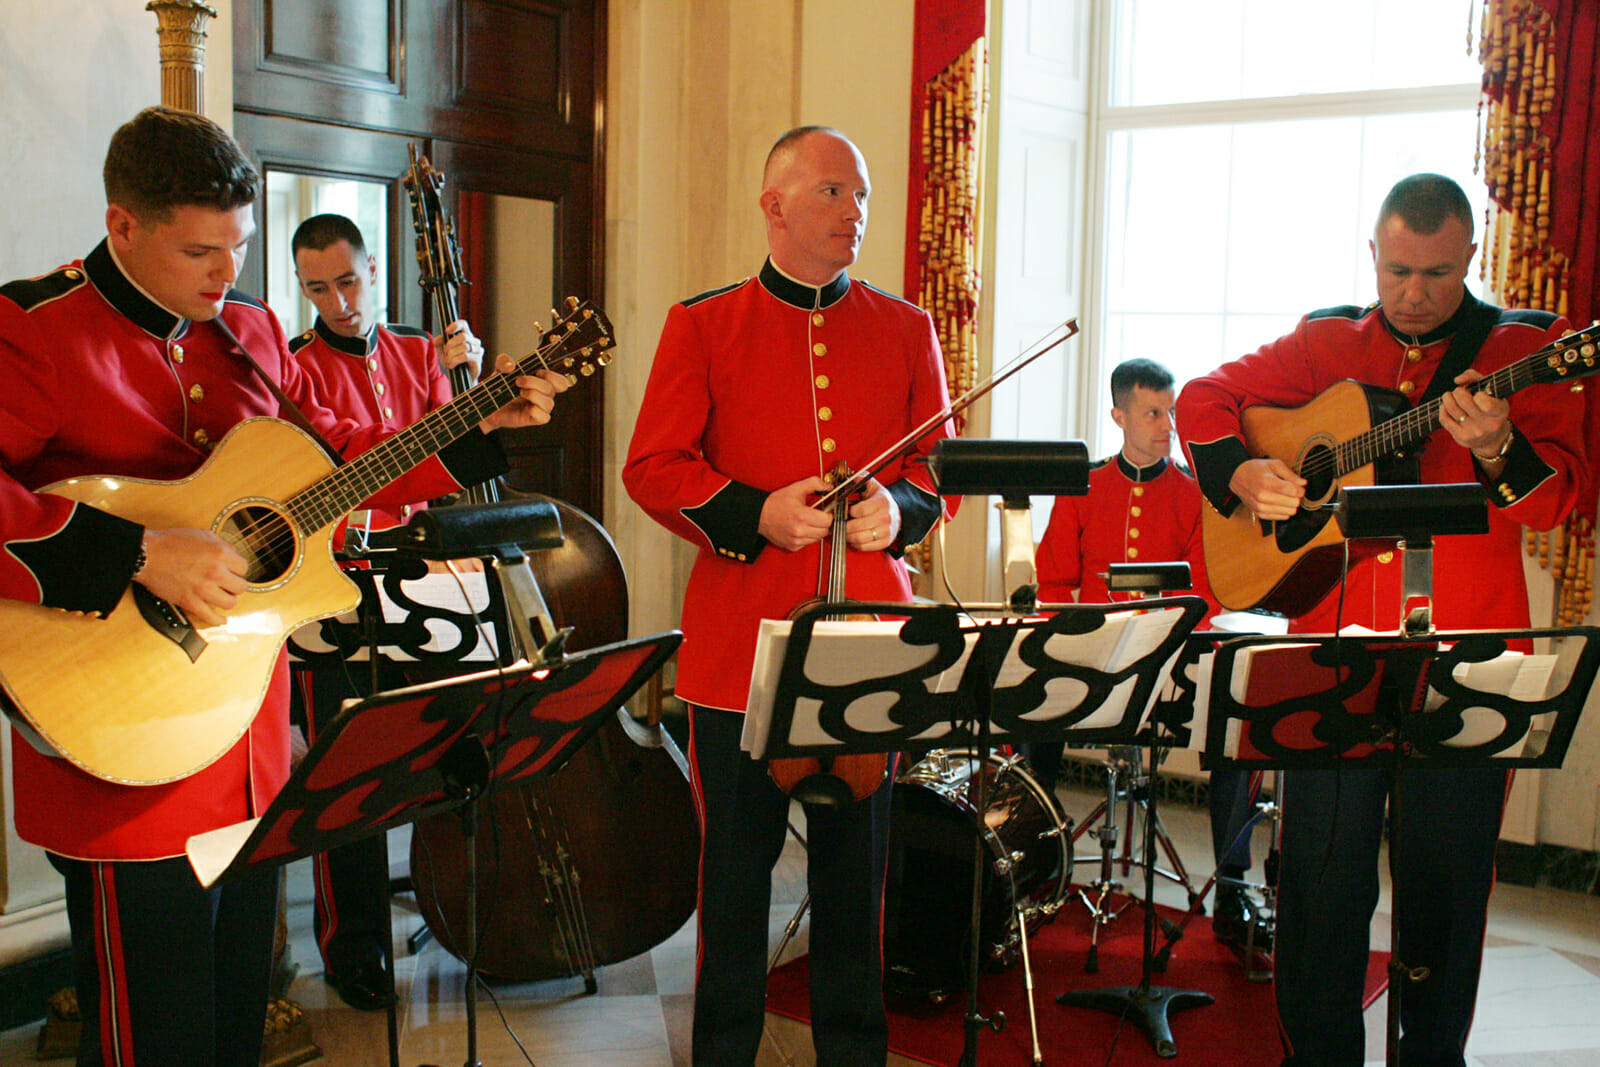 Performing in the Grand Foyer of the White House